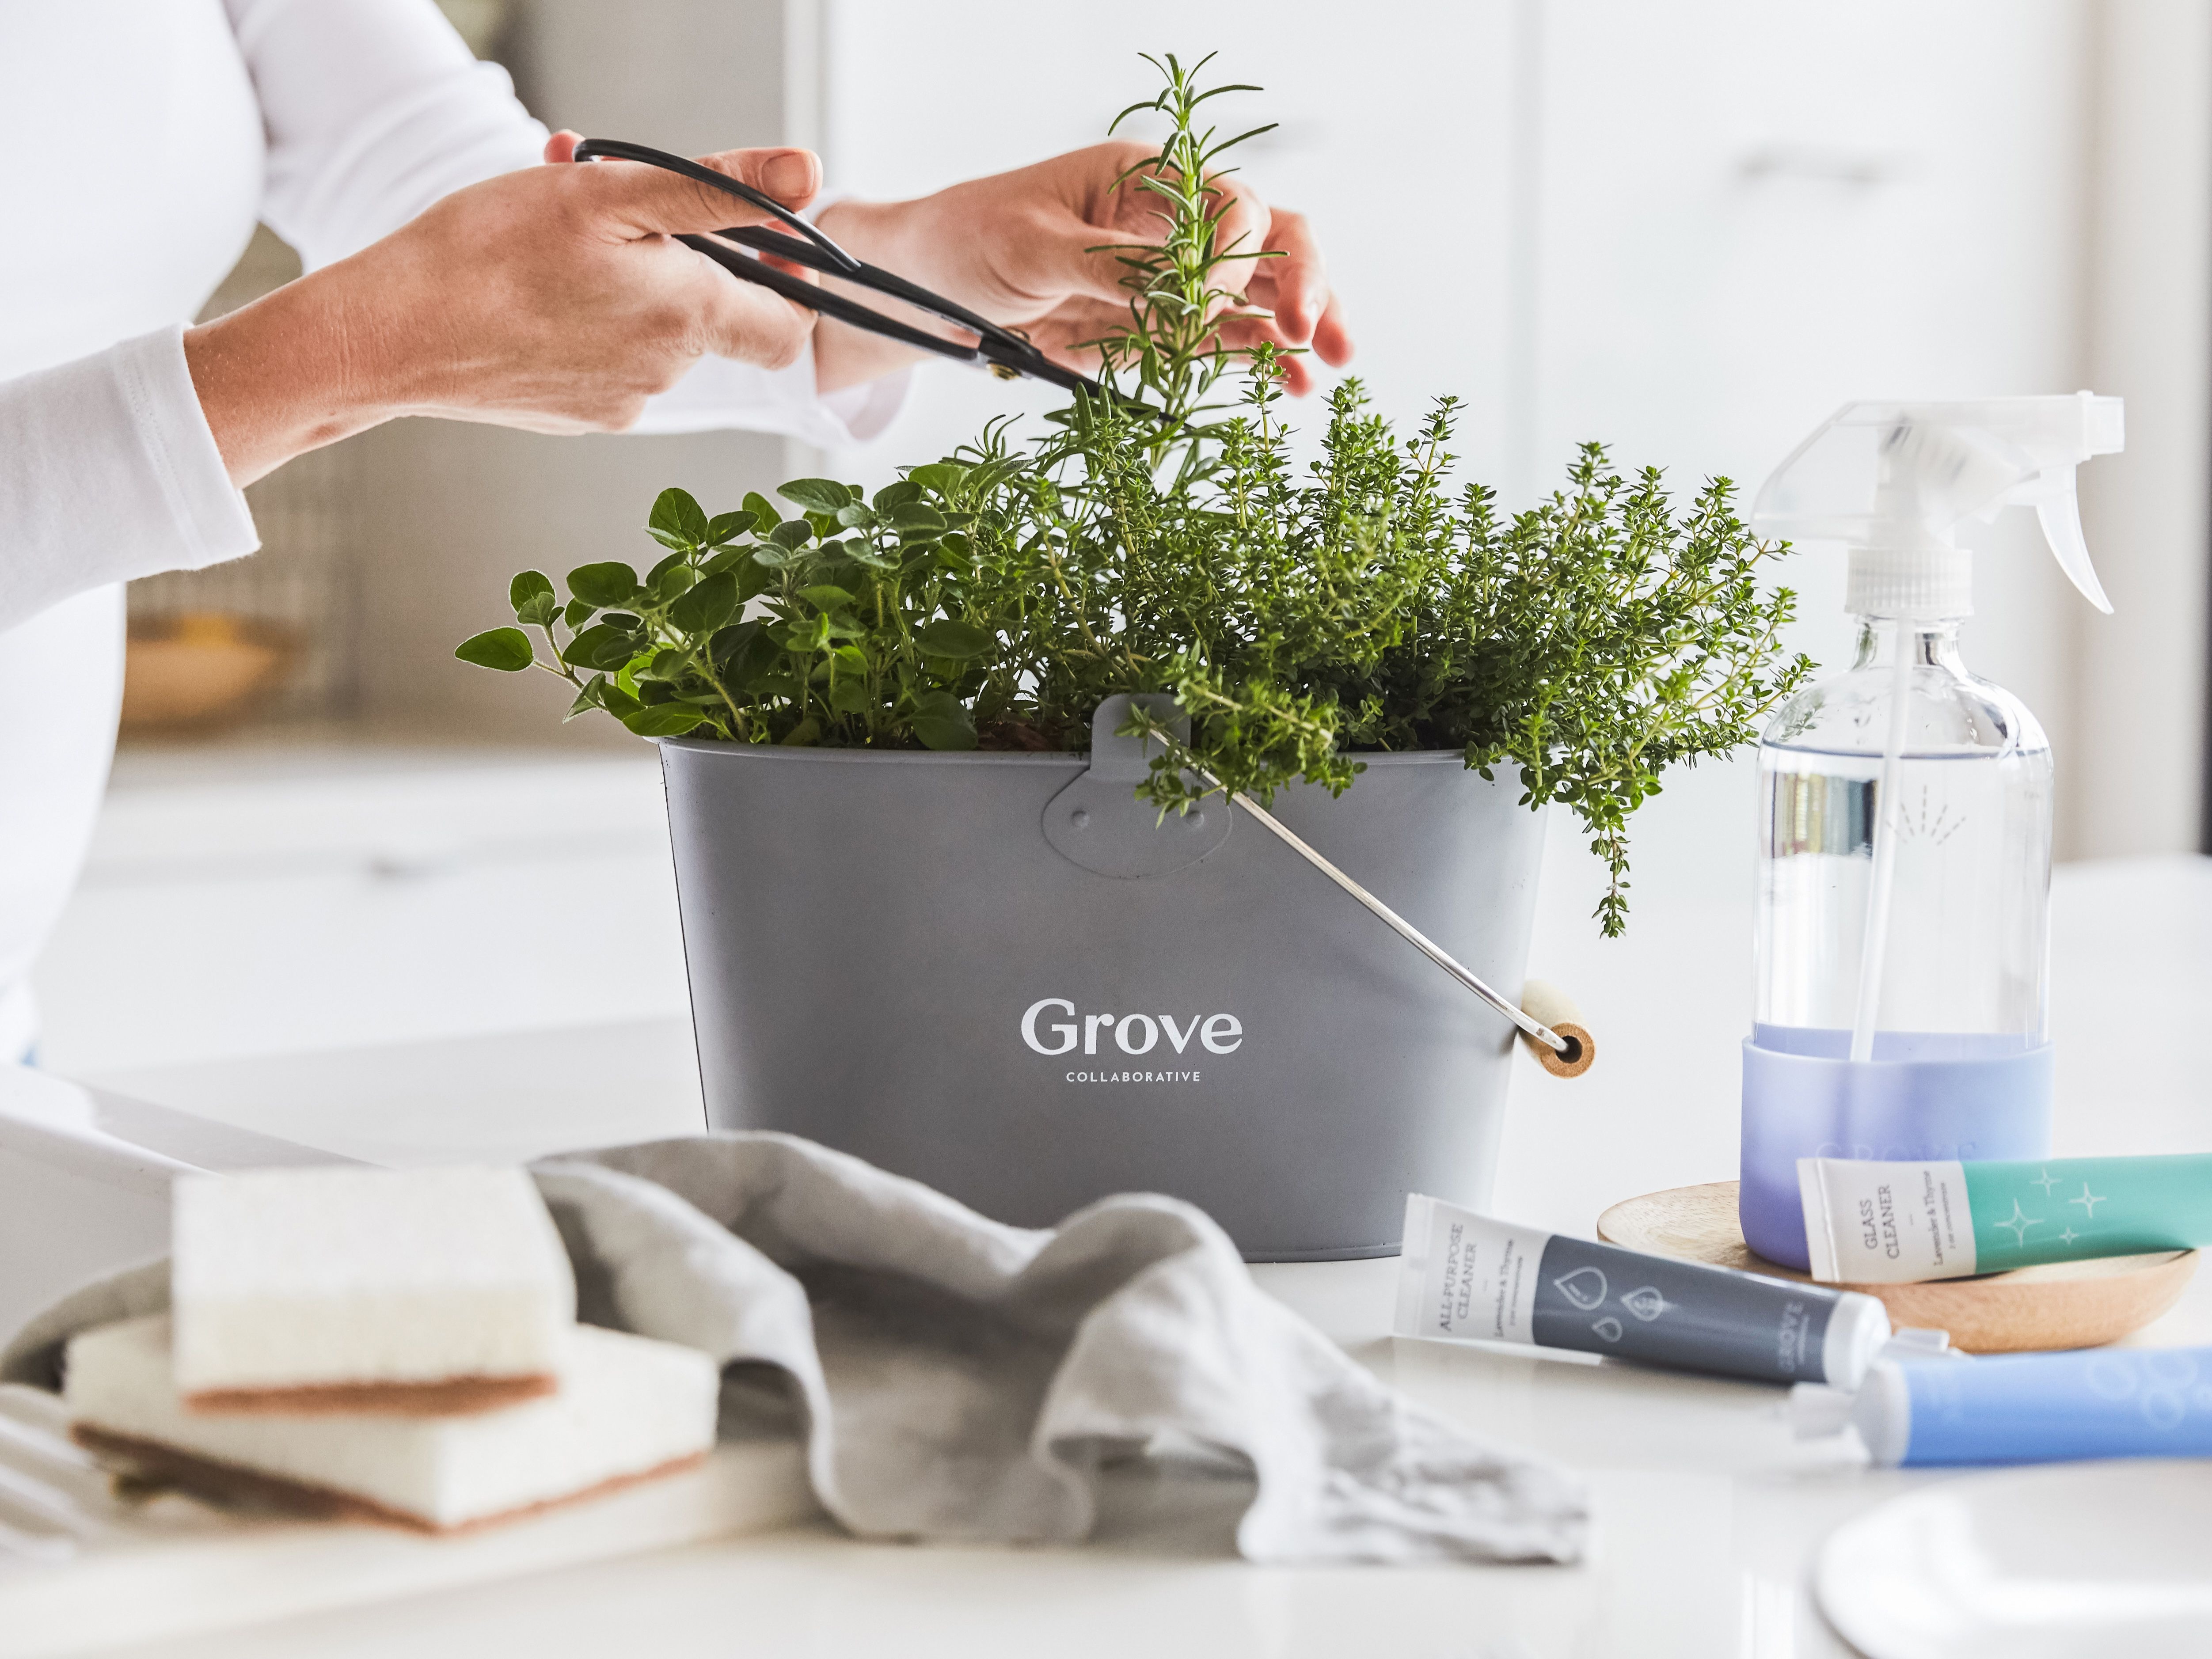 Image of hands trimming herbs from Grove Gardening Kit